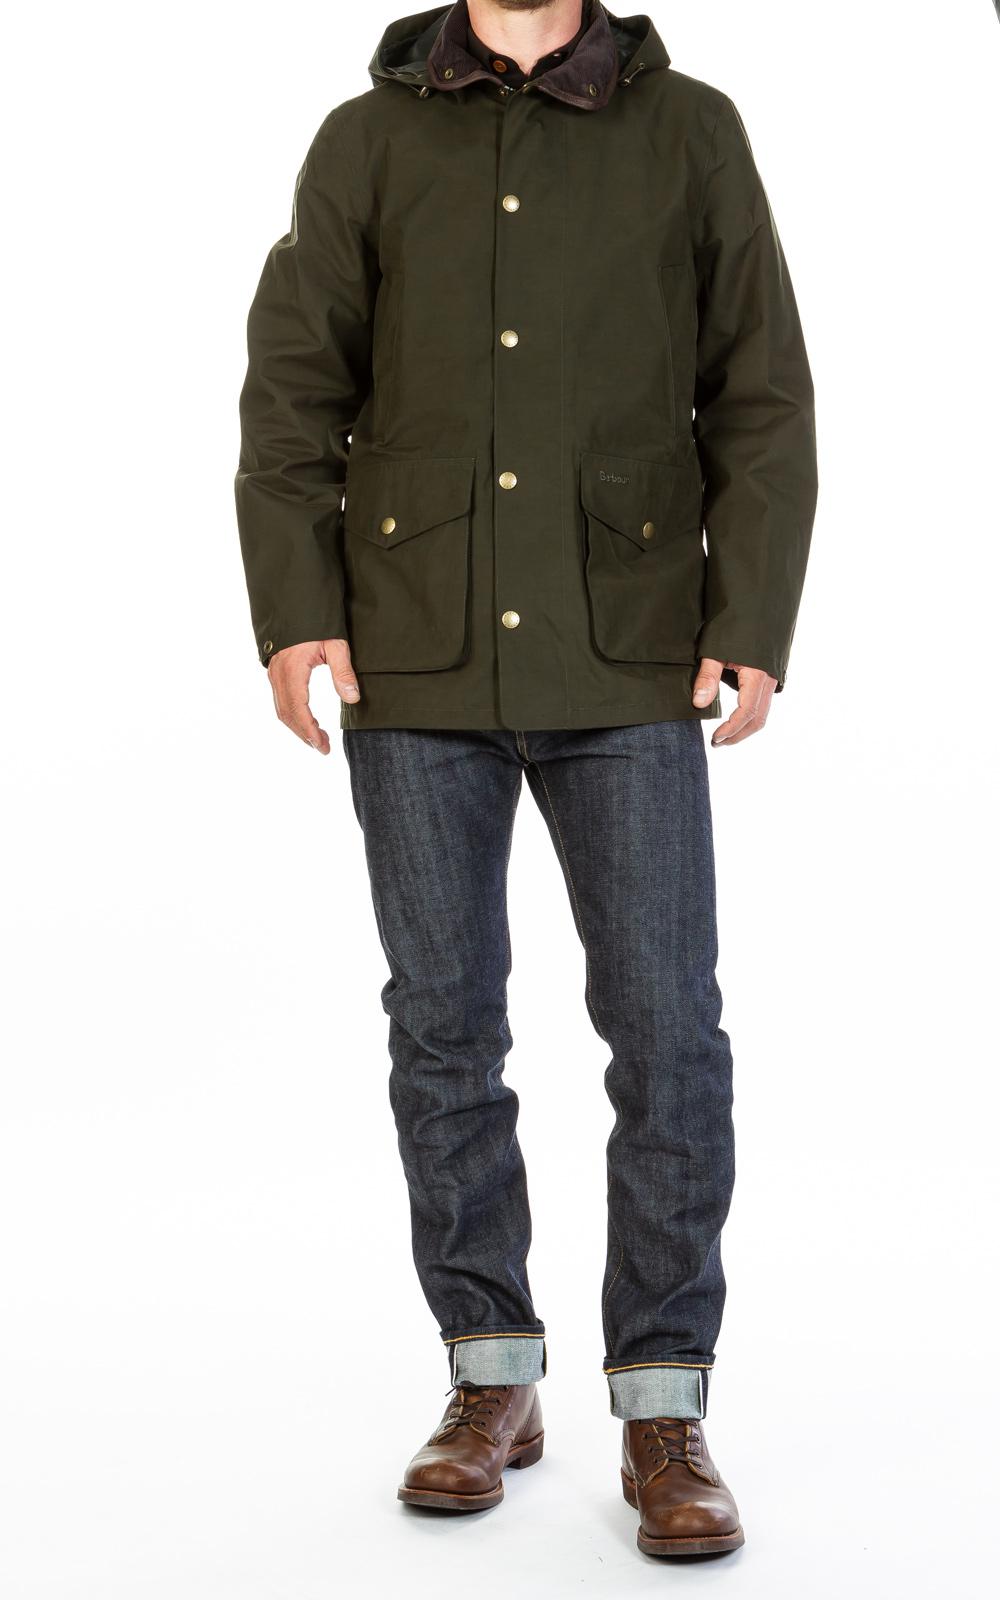 barbour mallaig jacket Cheaper Than Retail Price> Buy Clothing, Accessories  and lifestyle products for women & men -